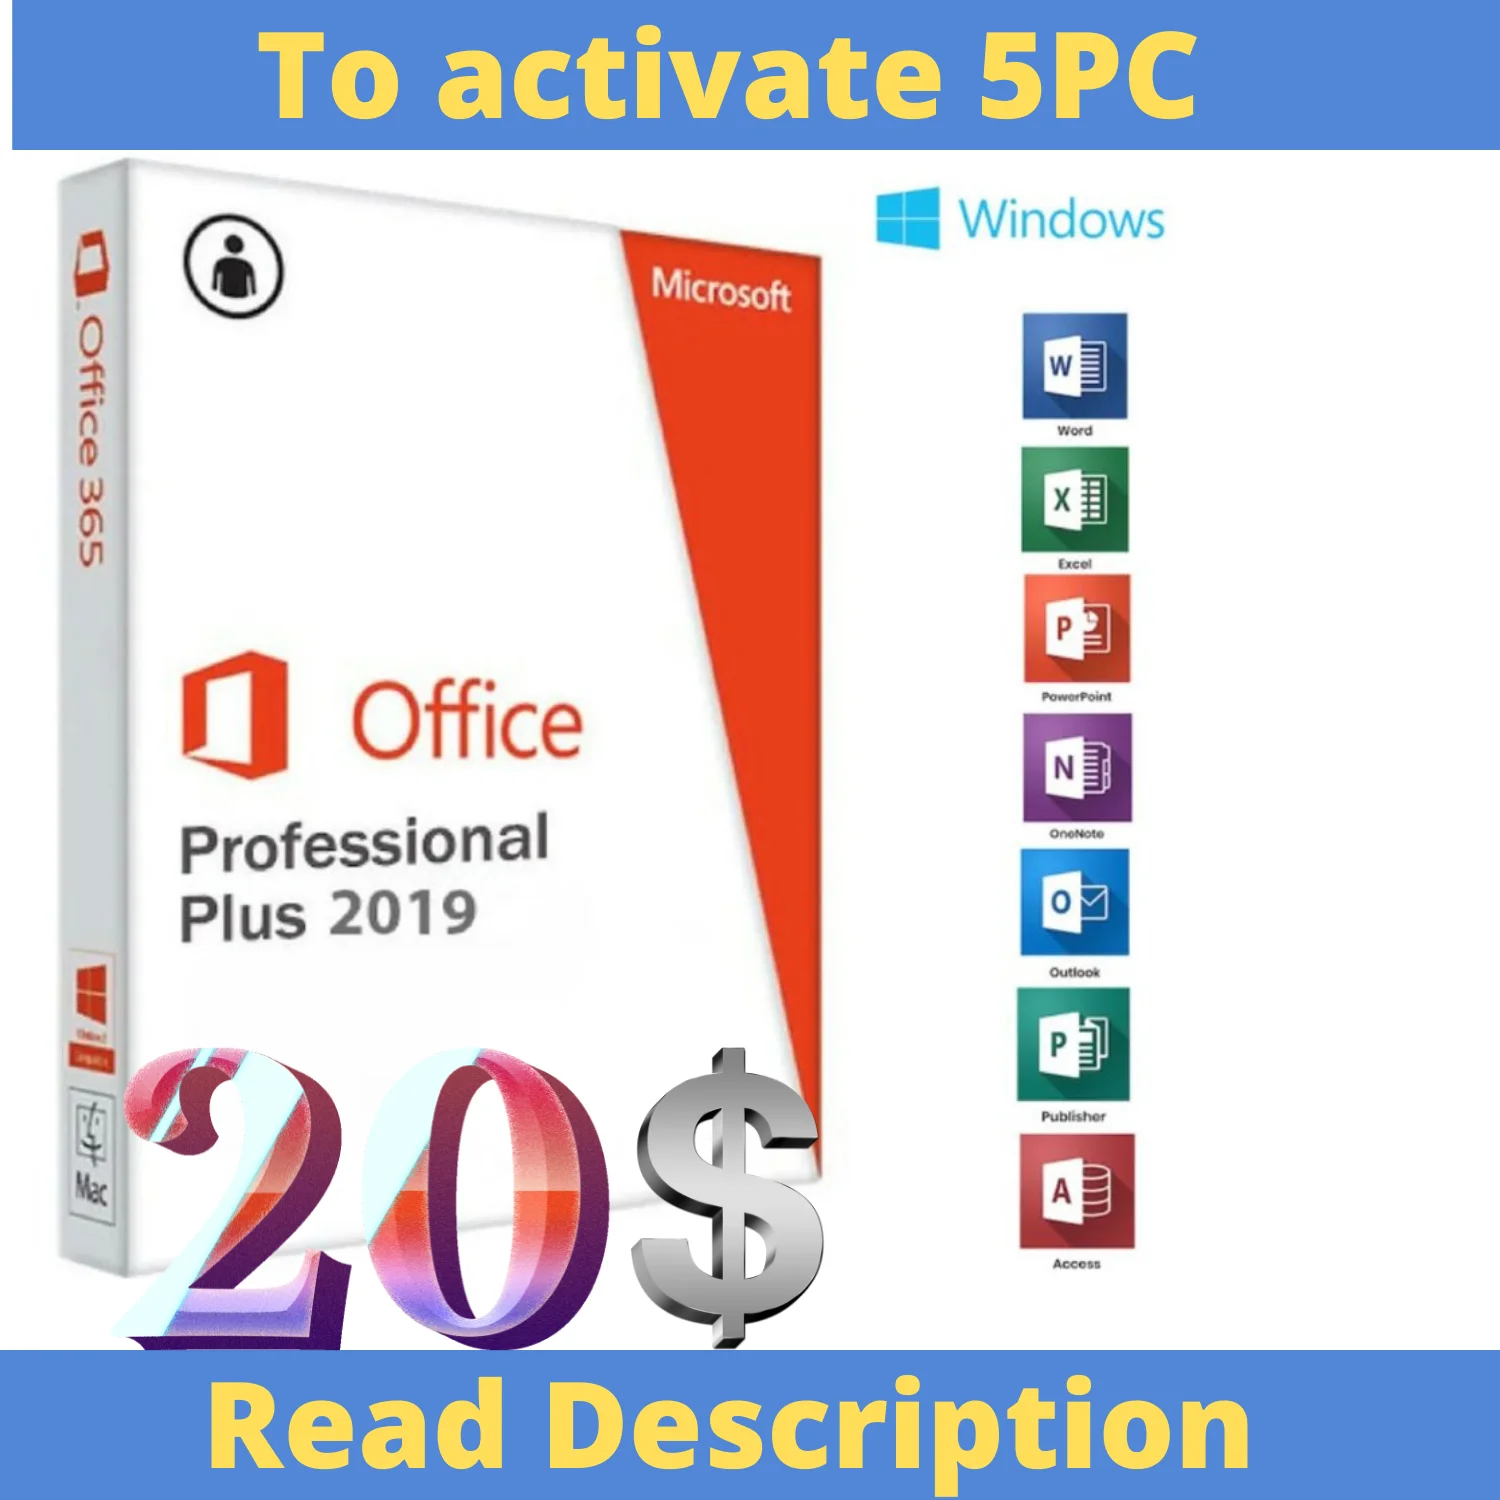 

{Microsoft Office 2019 professional Plus key Global Works All Country And Language Read Description}